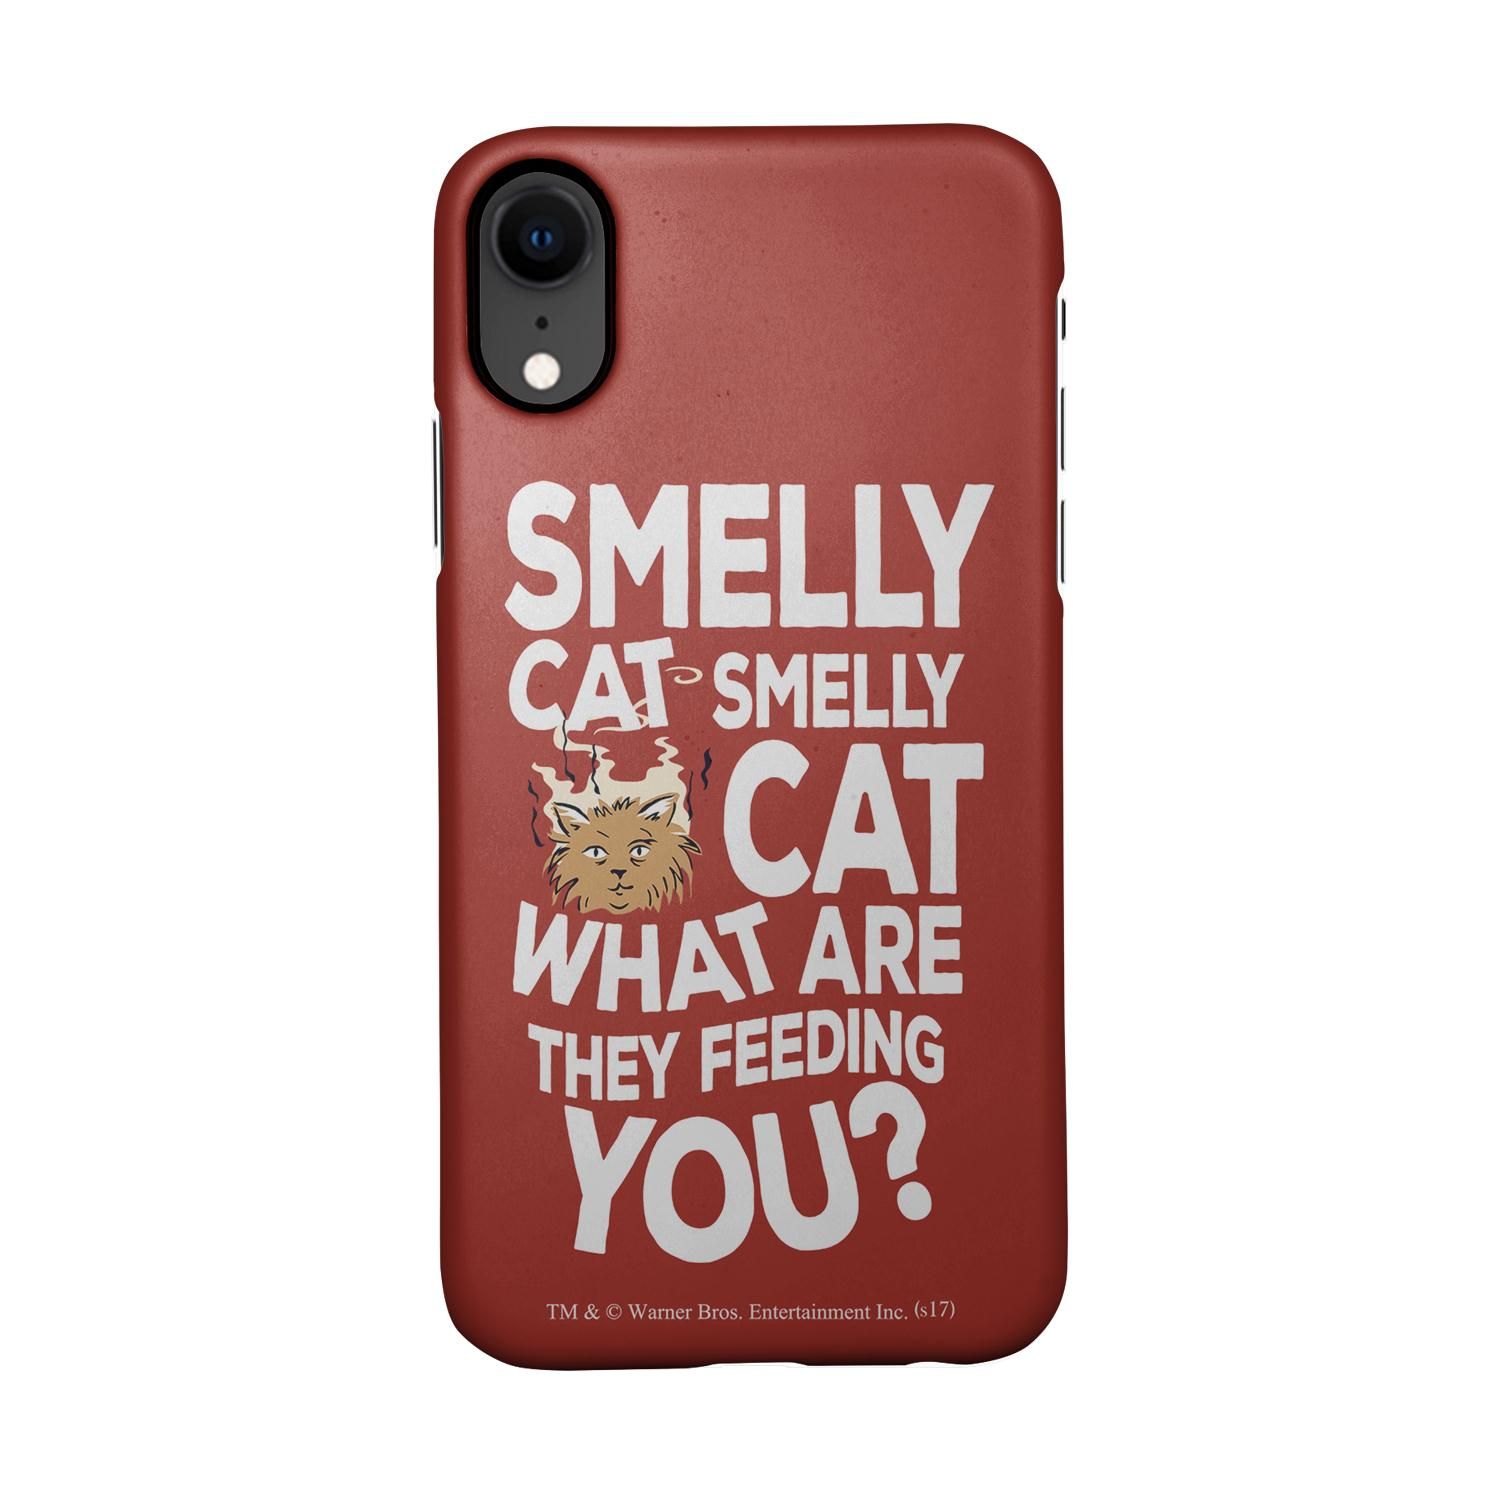 Buy Friends Smelly Cat - Sleek Phone Case for iPhone XR Online